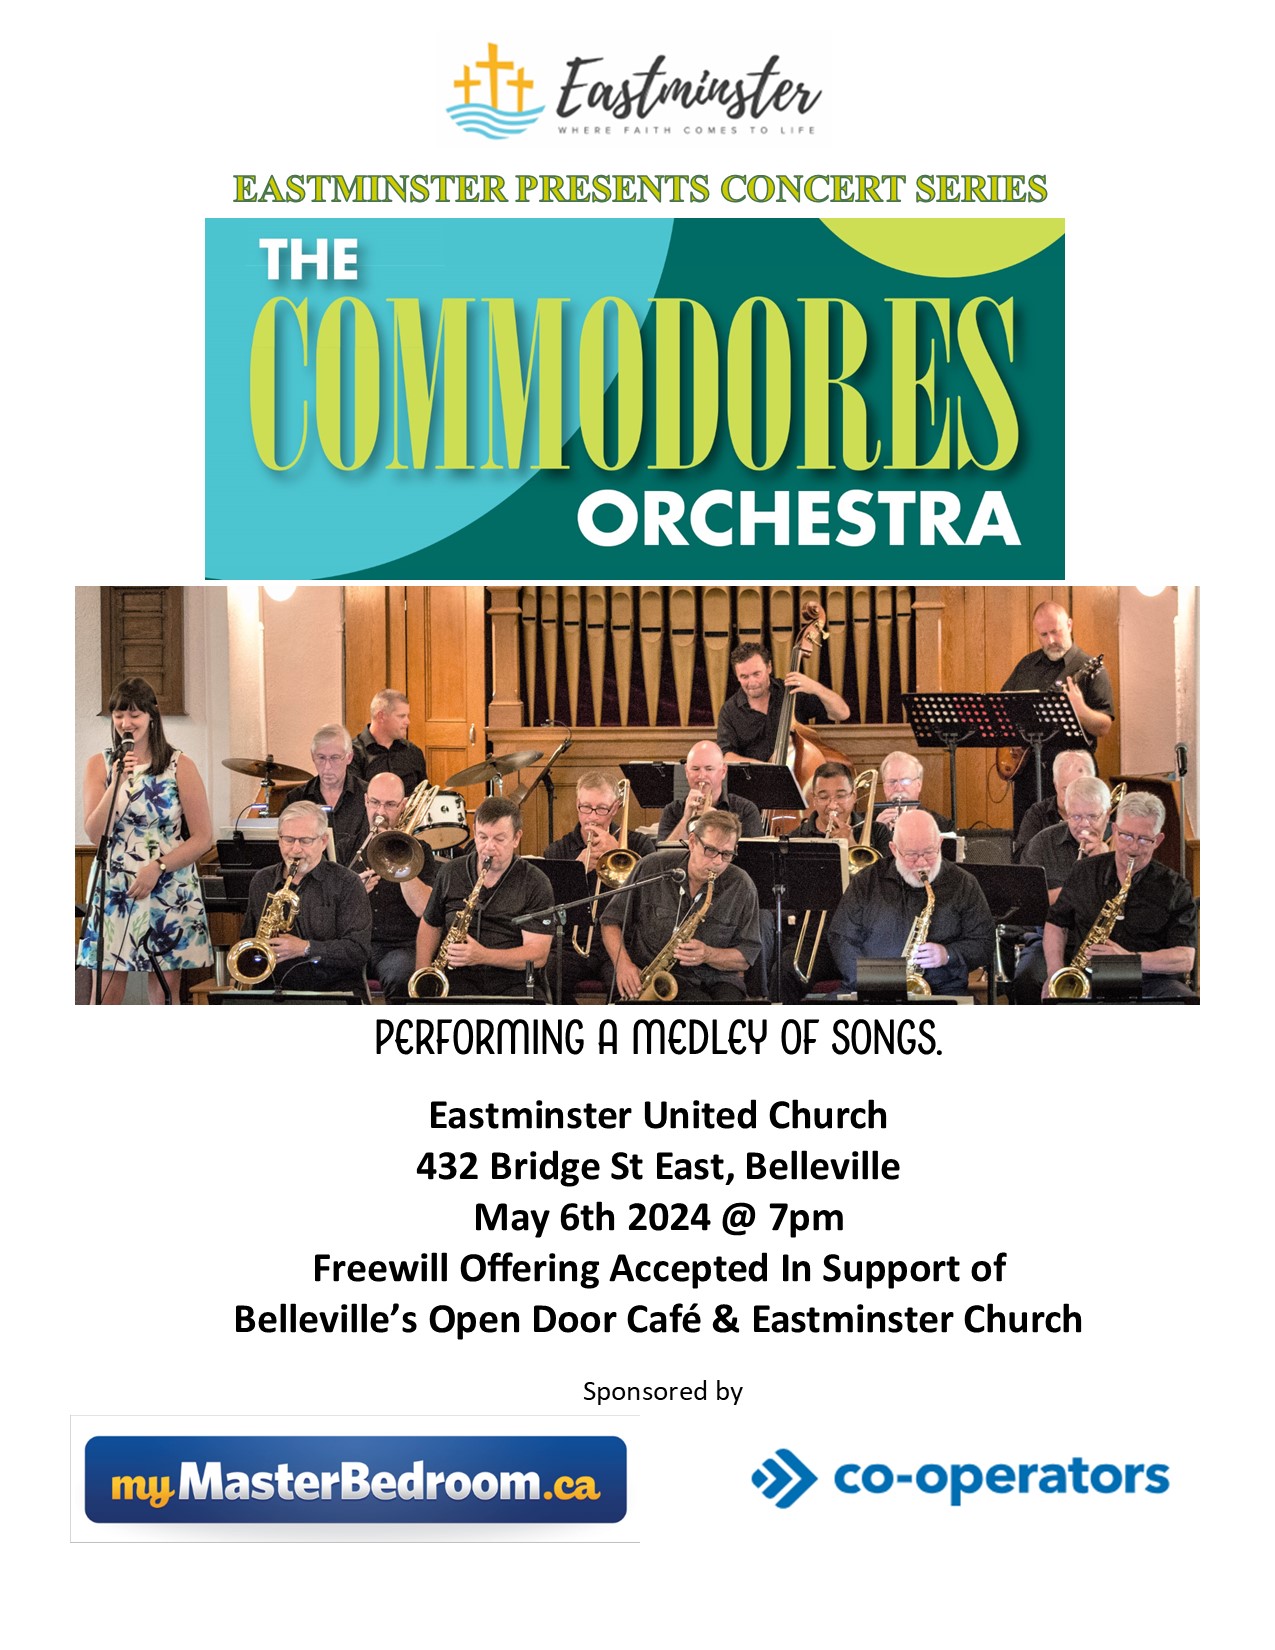 Poster titled "The commodores" with a photo of the group playing